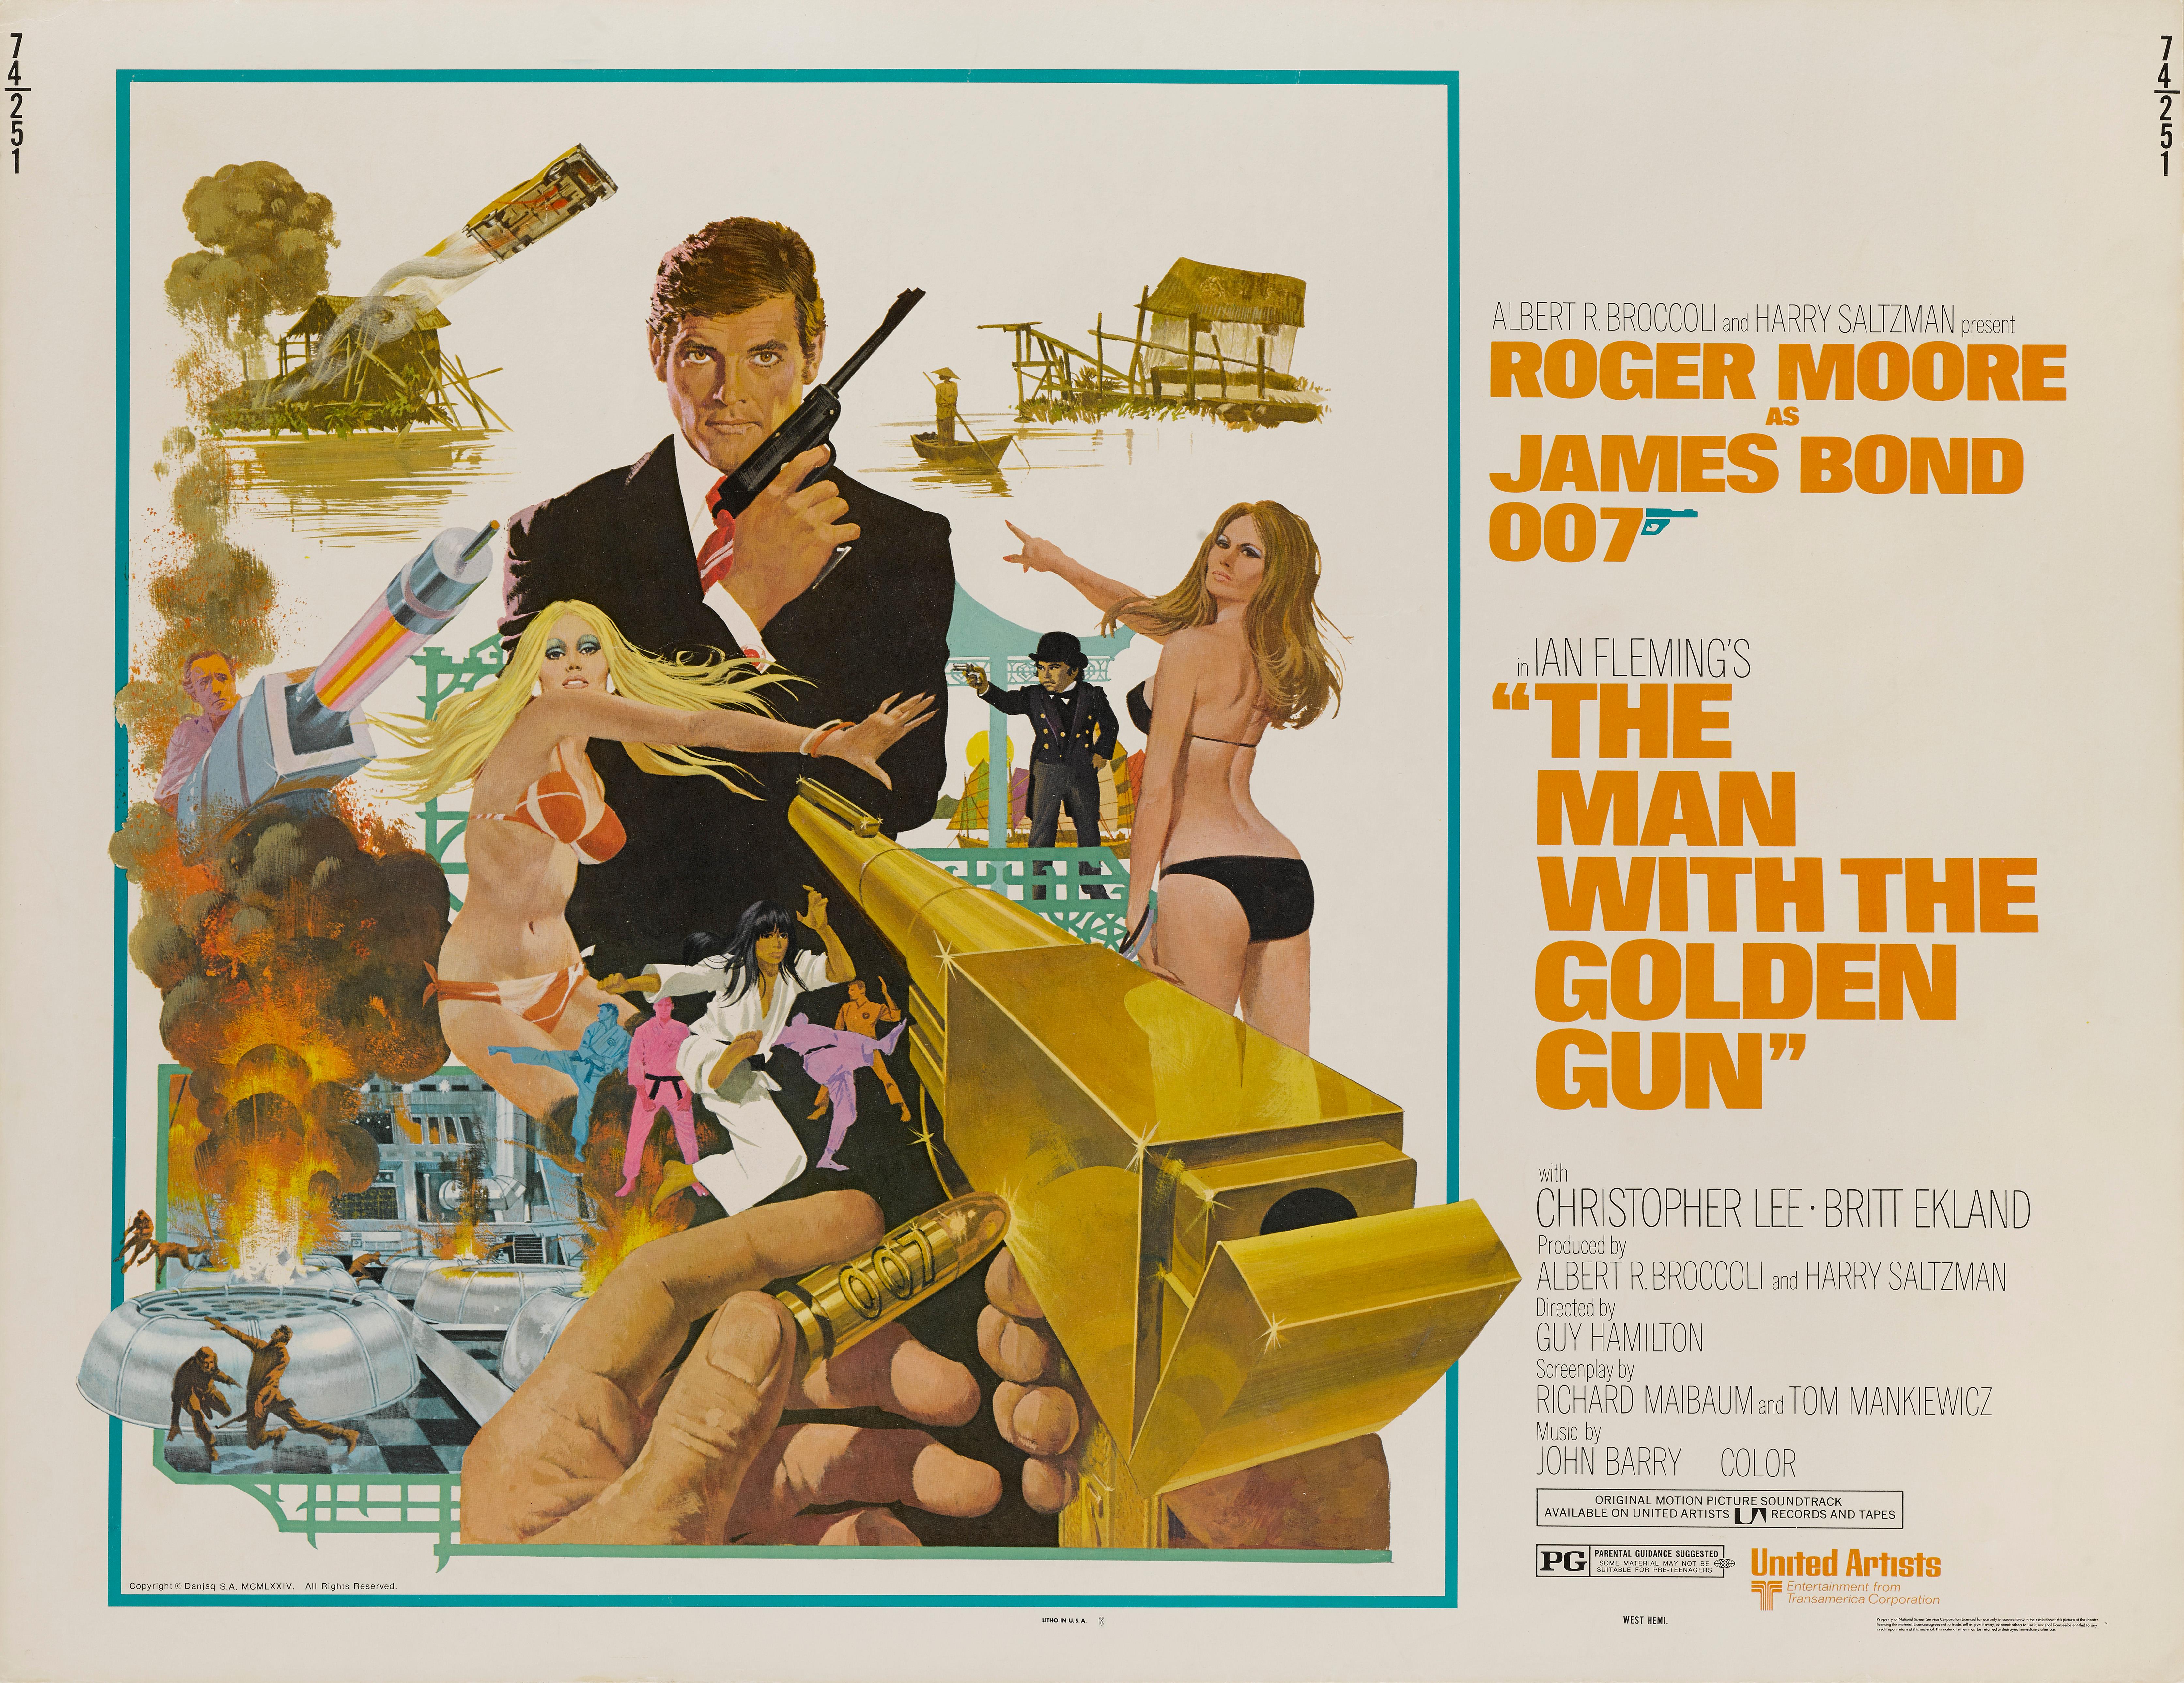 Original US movie poster for the 1974 James Bond film staring Roger Moore.
This was Moors second roll as 007.